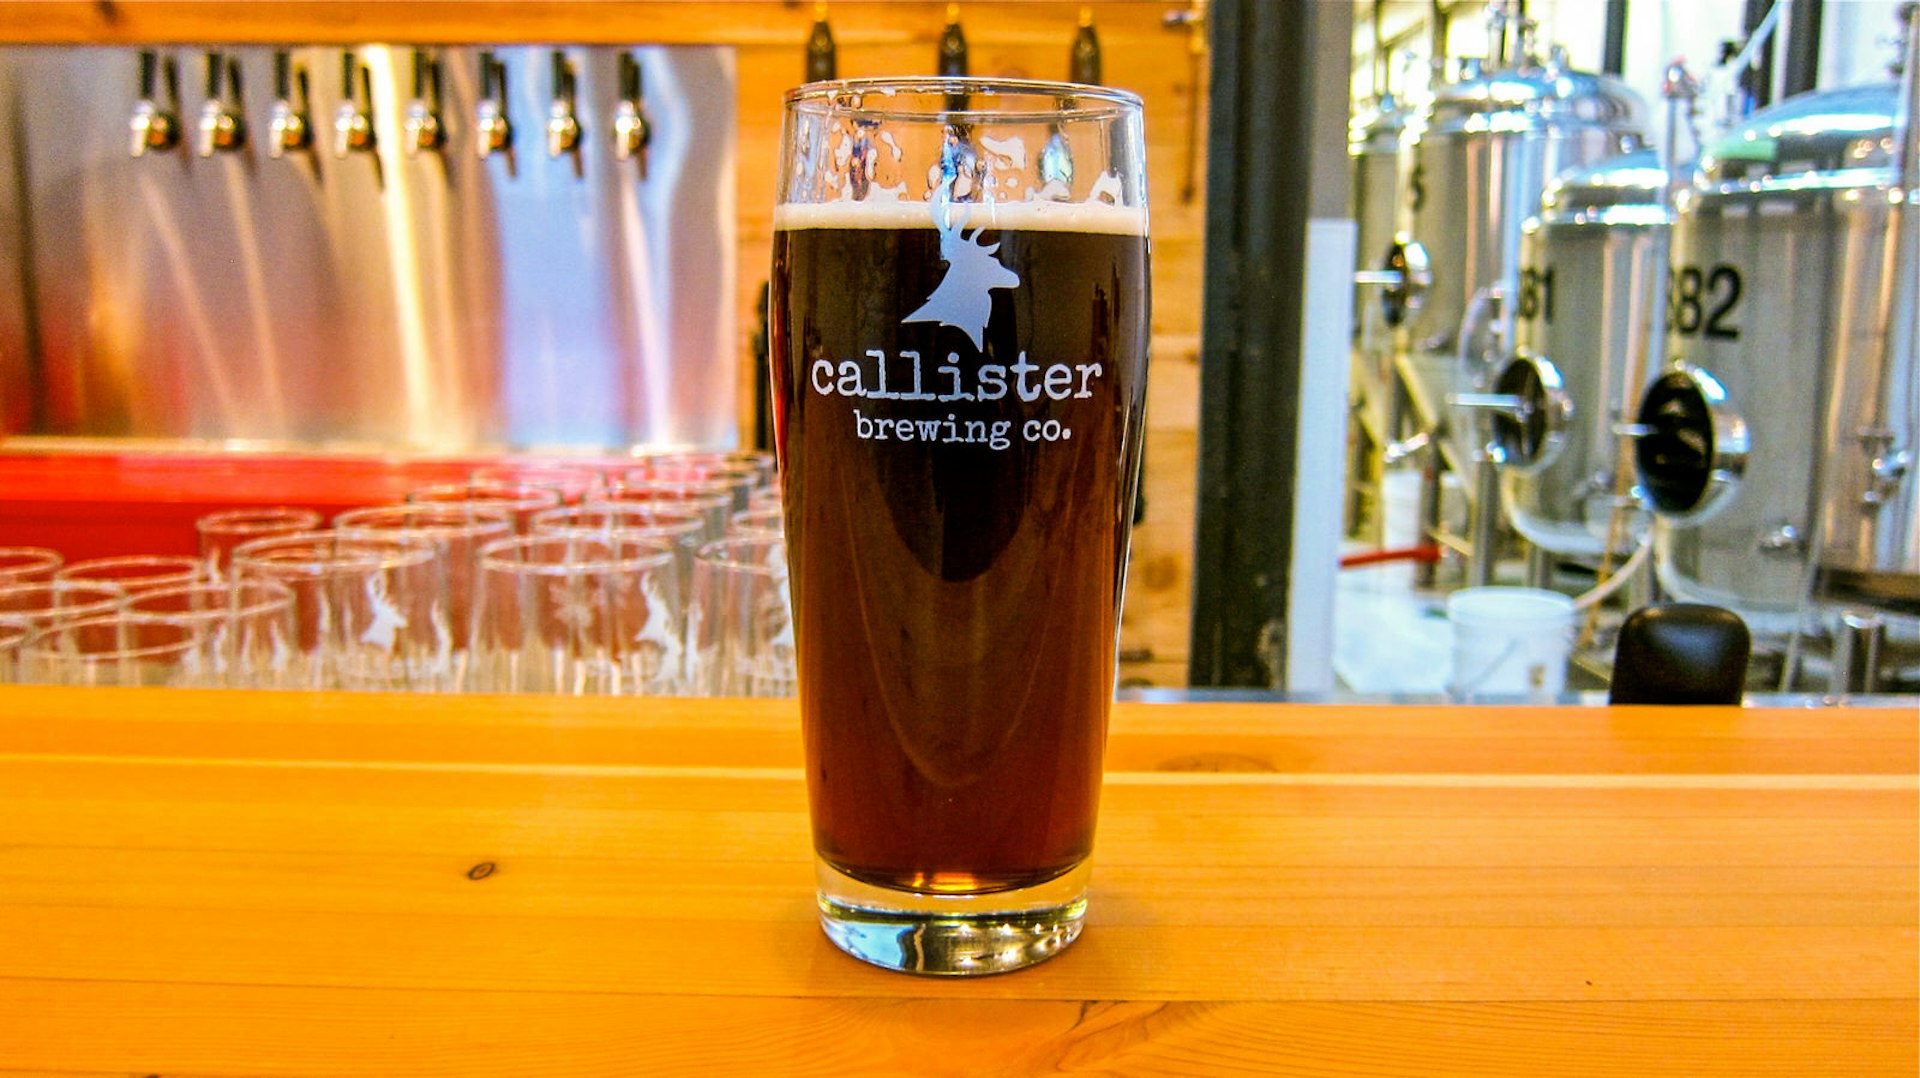 Housing not one but four nanobreweries, Callister Brewing gives drinkers a variety of options © John Lee / Lonely Planet